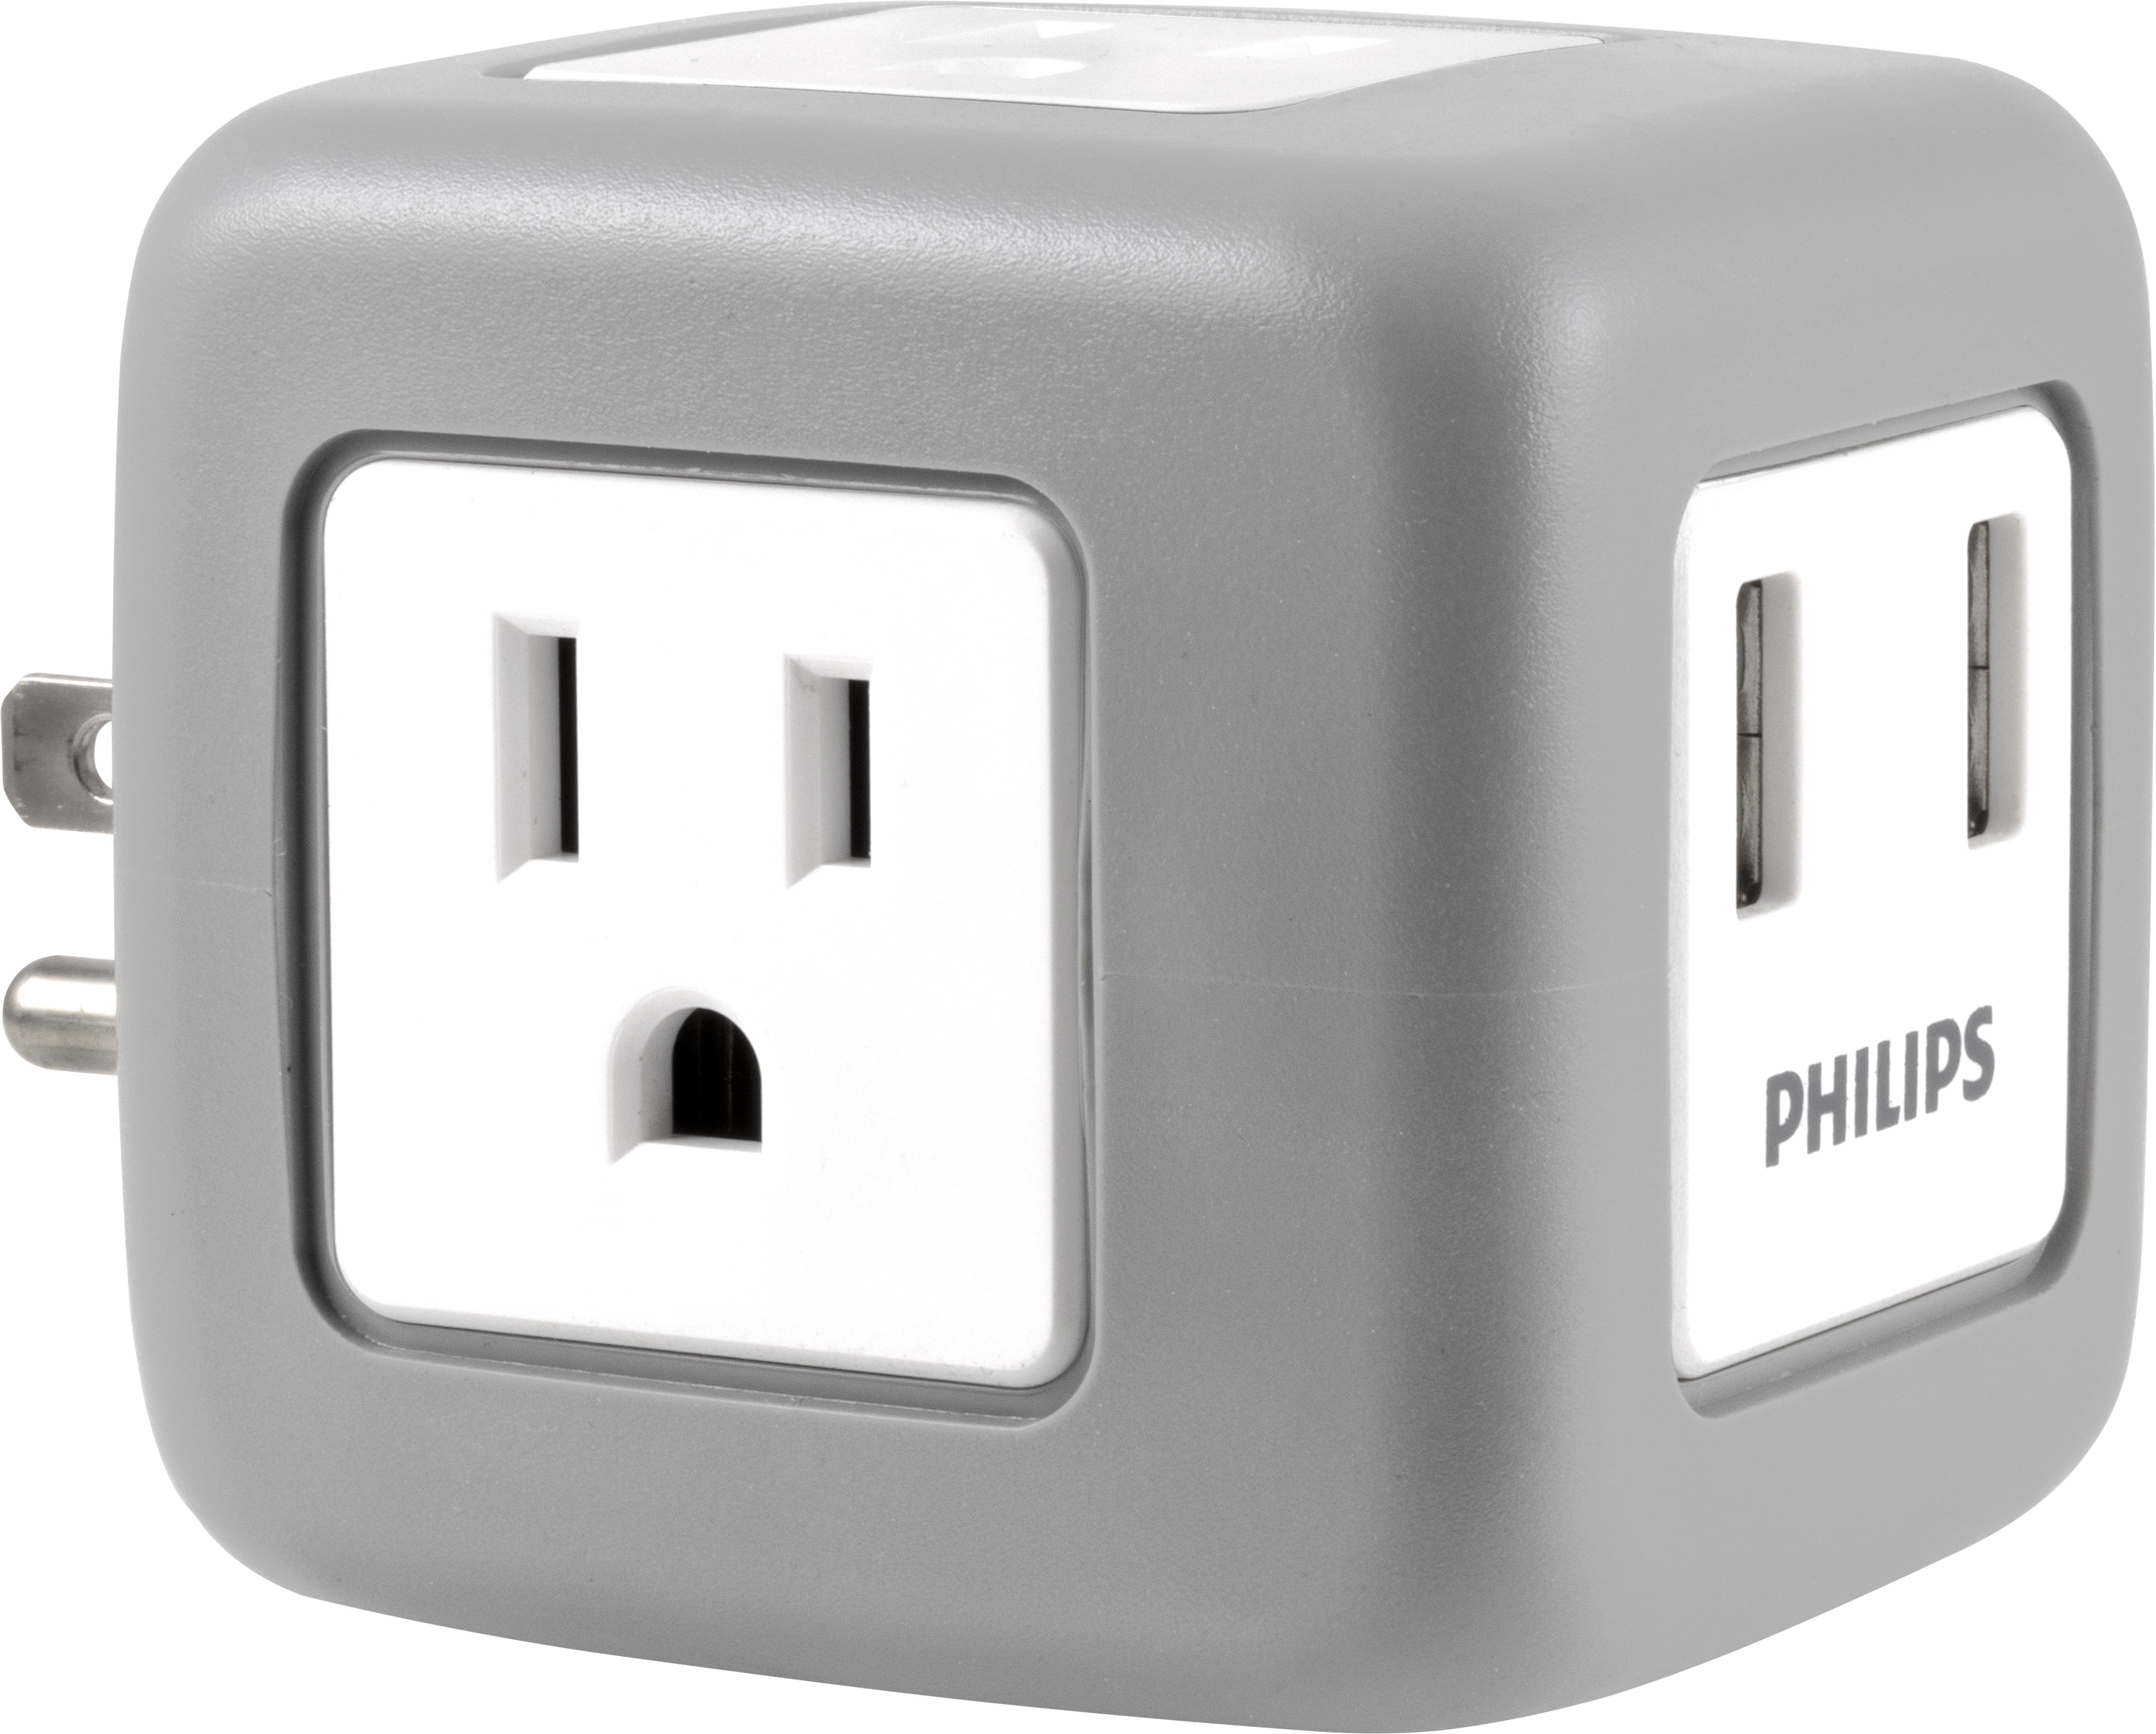 Compact Adapter 3 Prong Outlets SPS6220WB/37 Charging Station PHILIPS Power Strip Wall Tap 125V AC/15A/1875W White ETL Certified 2 USB Ports 